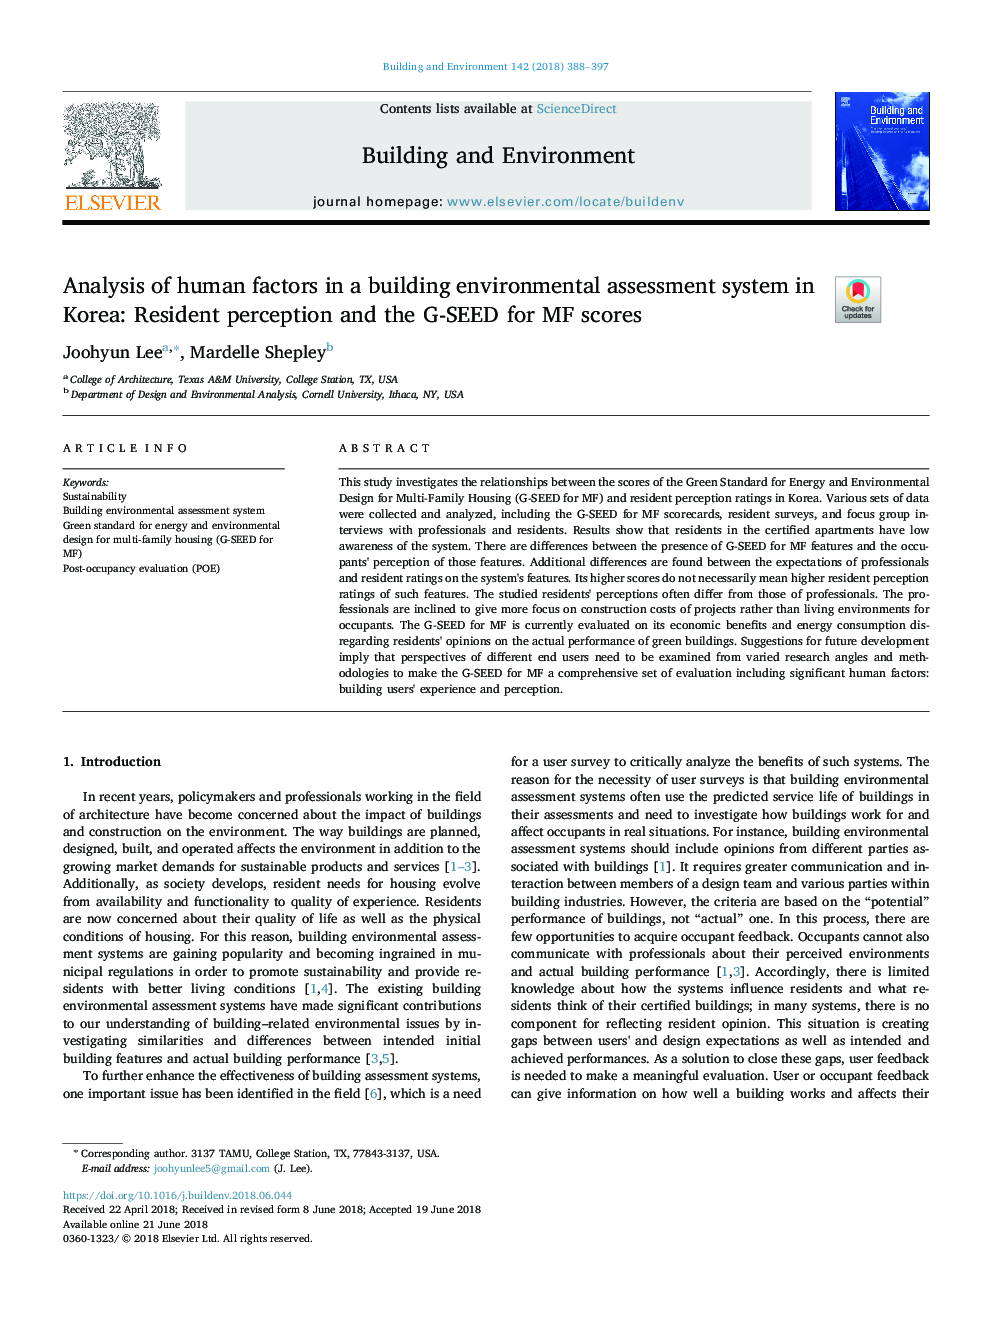 Analysis of human factors in a building environmental assessment system in Korea: Resident perception and the G-SEED for MF scores